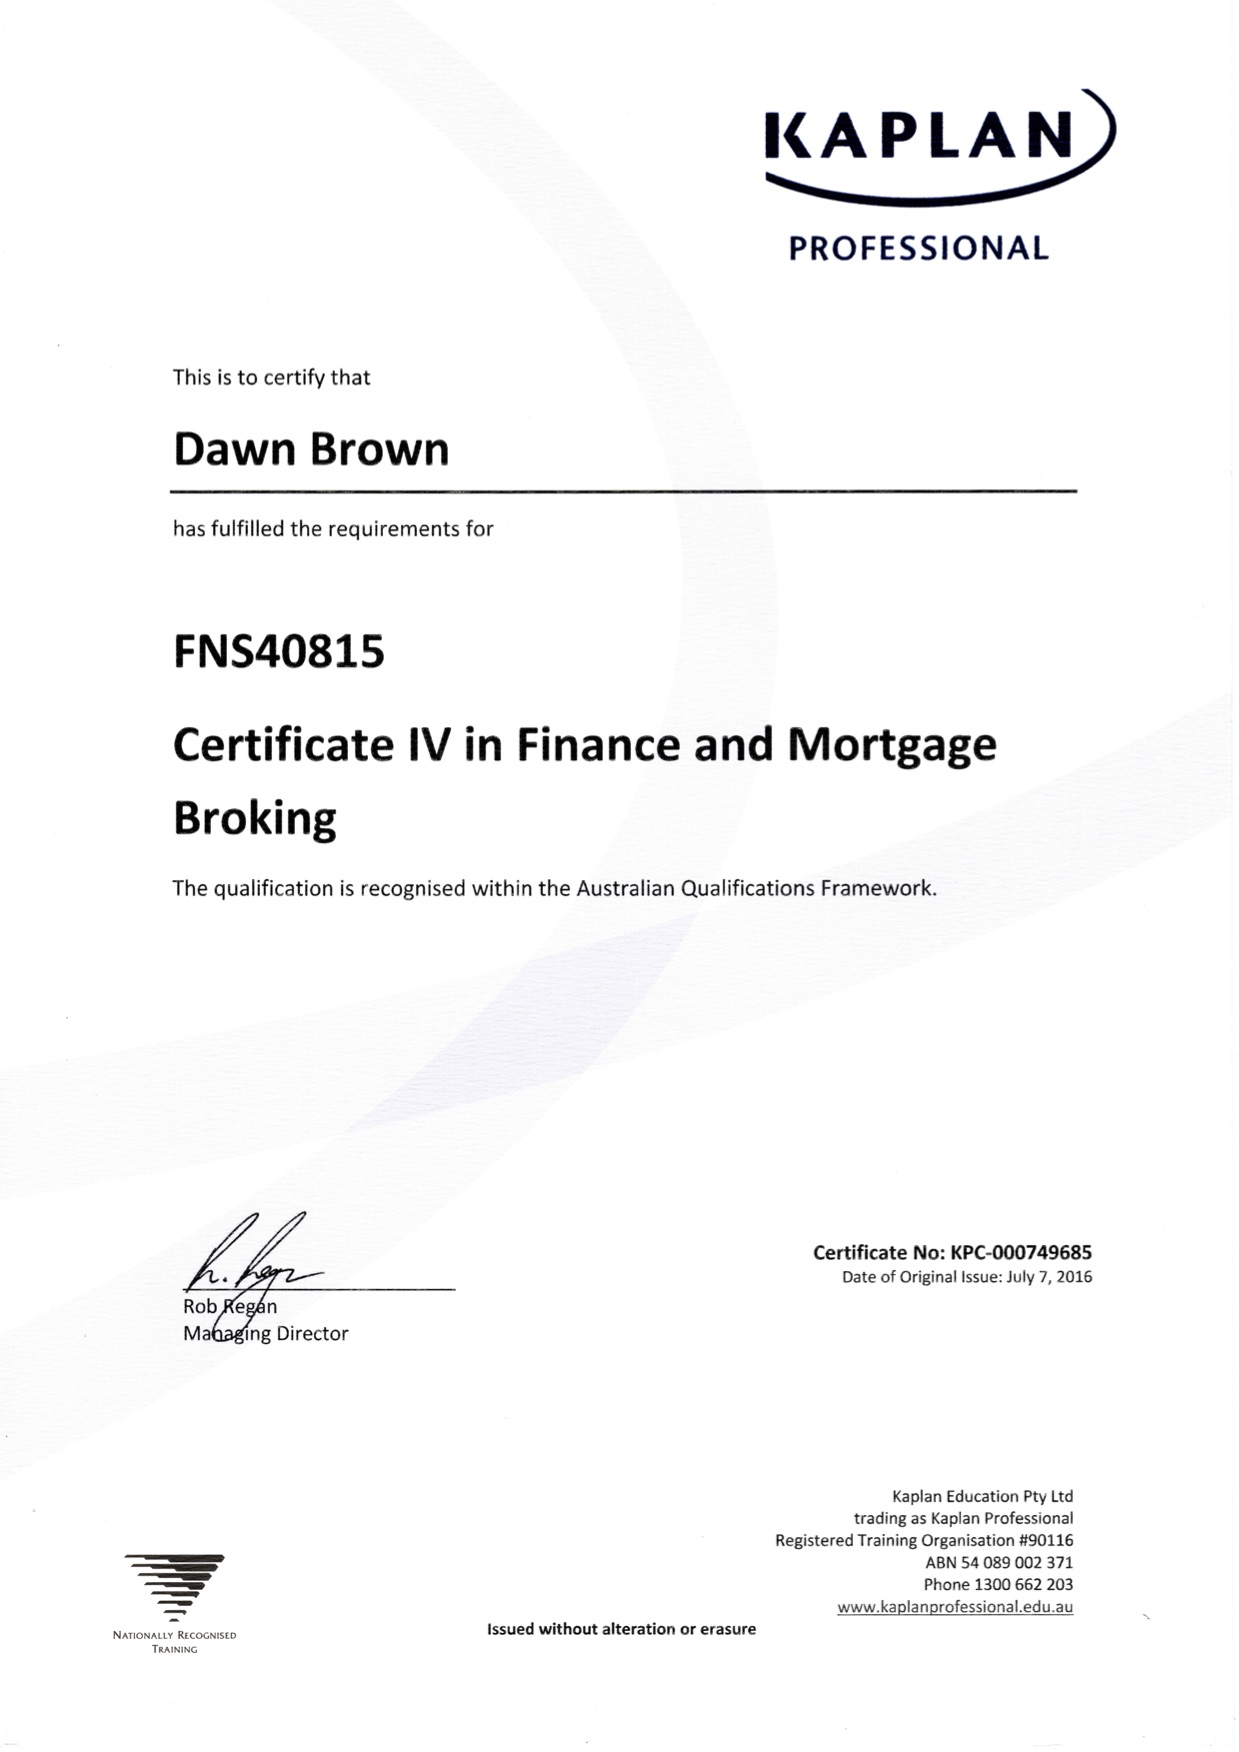 Certificate IV in Finance and Mortgage Broking